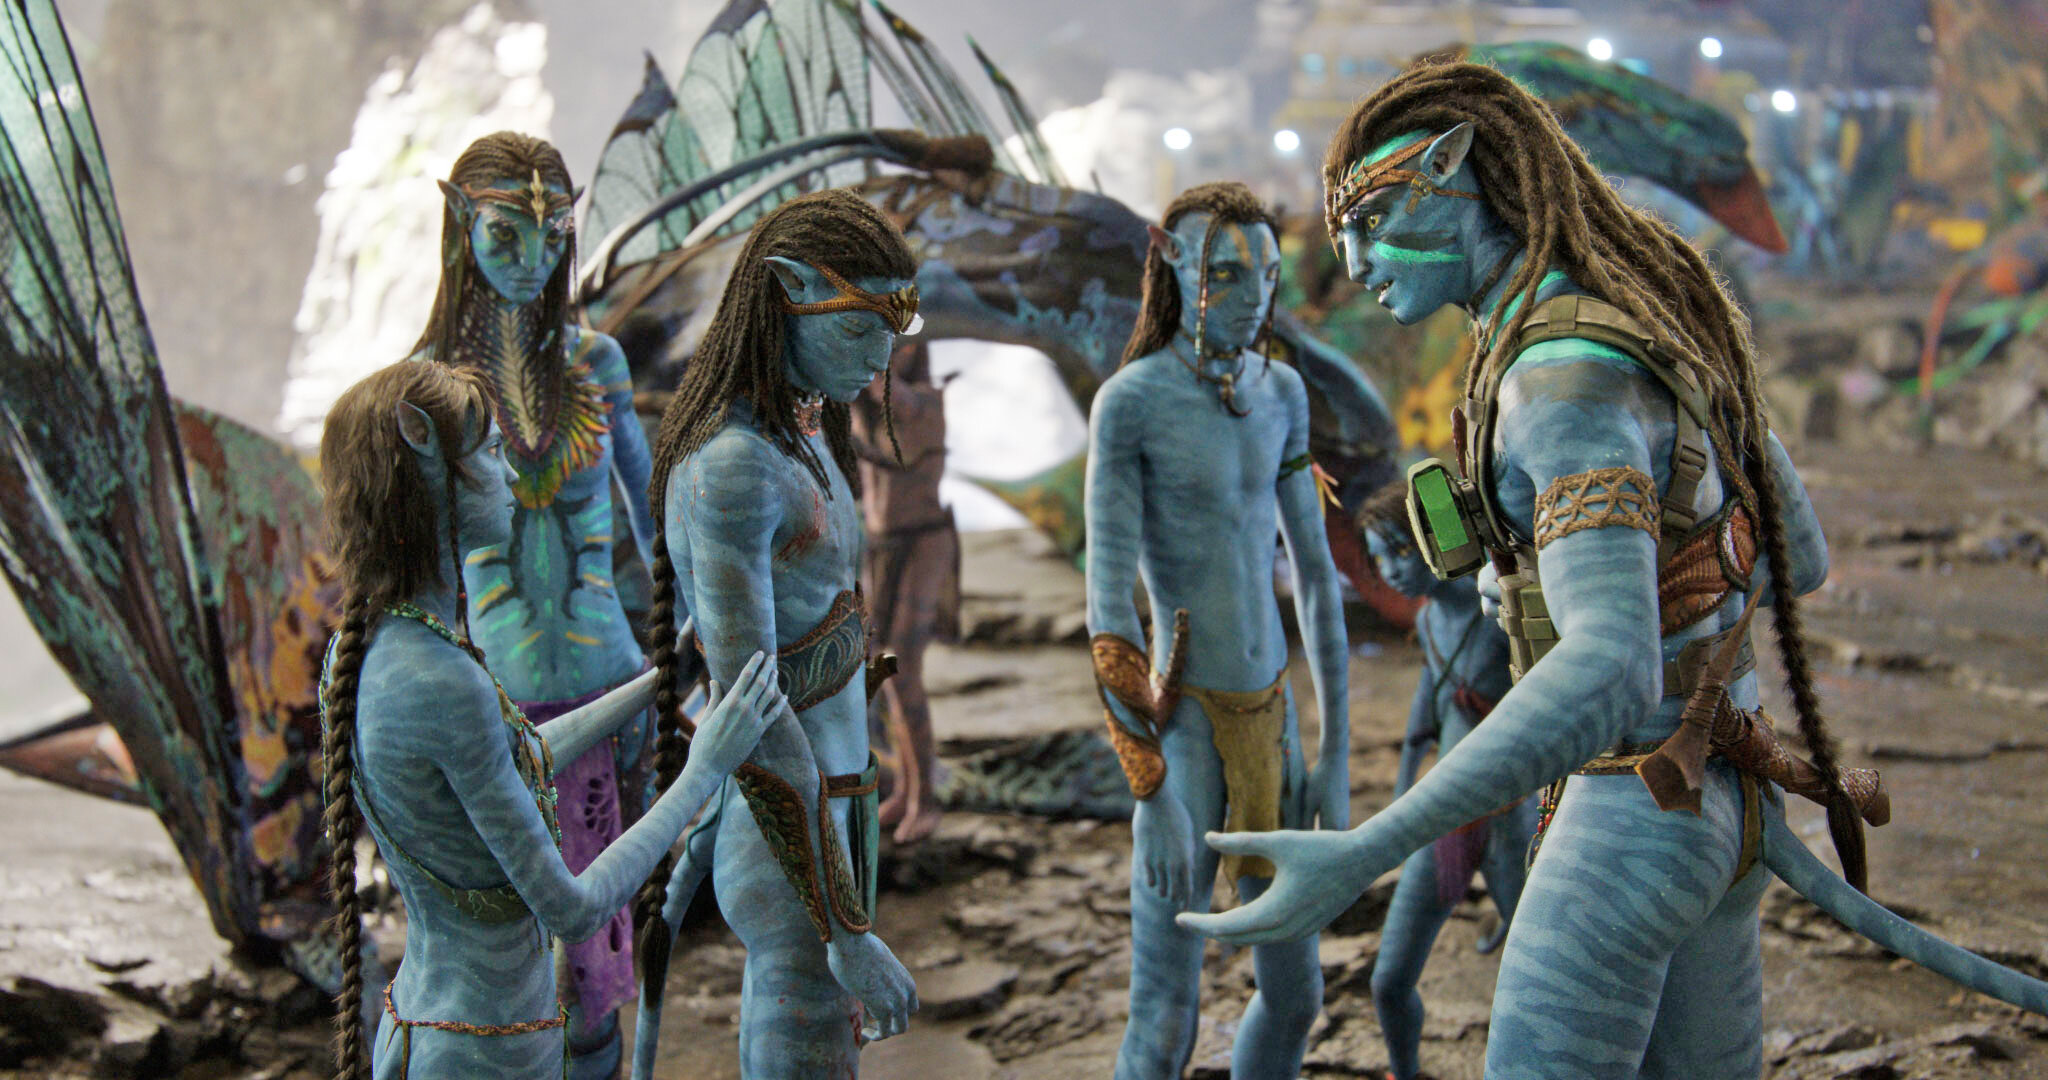 Q&A With James Cameron and the Cast of 'Avatar' 2